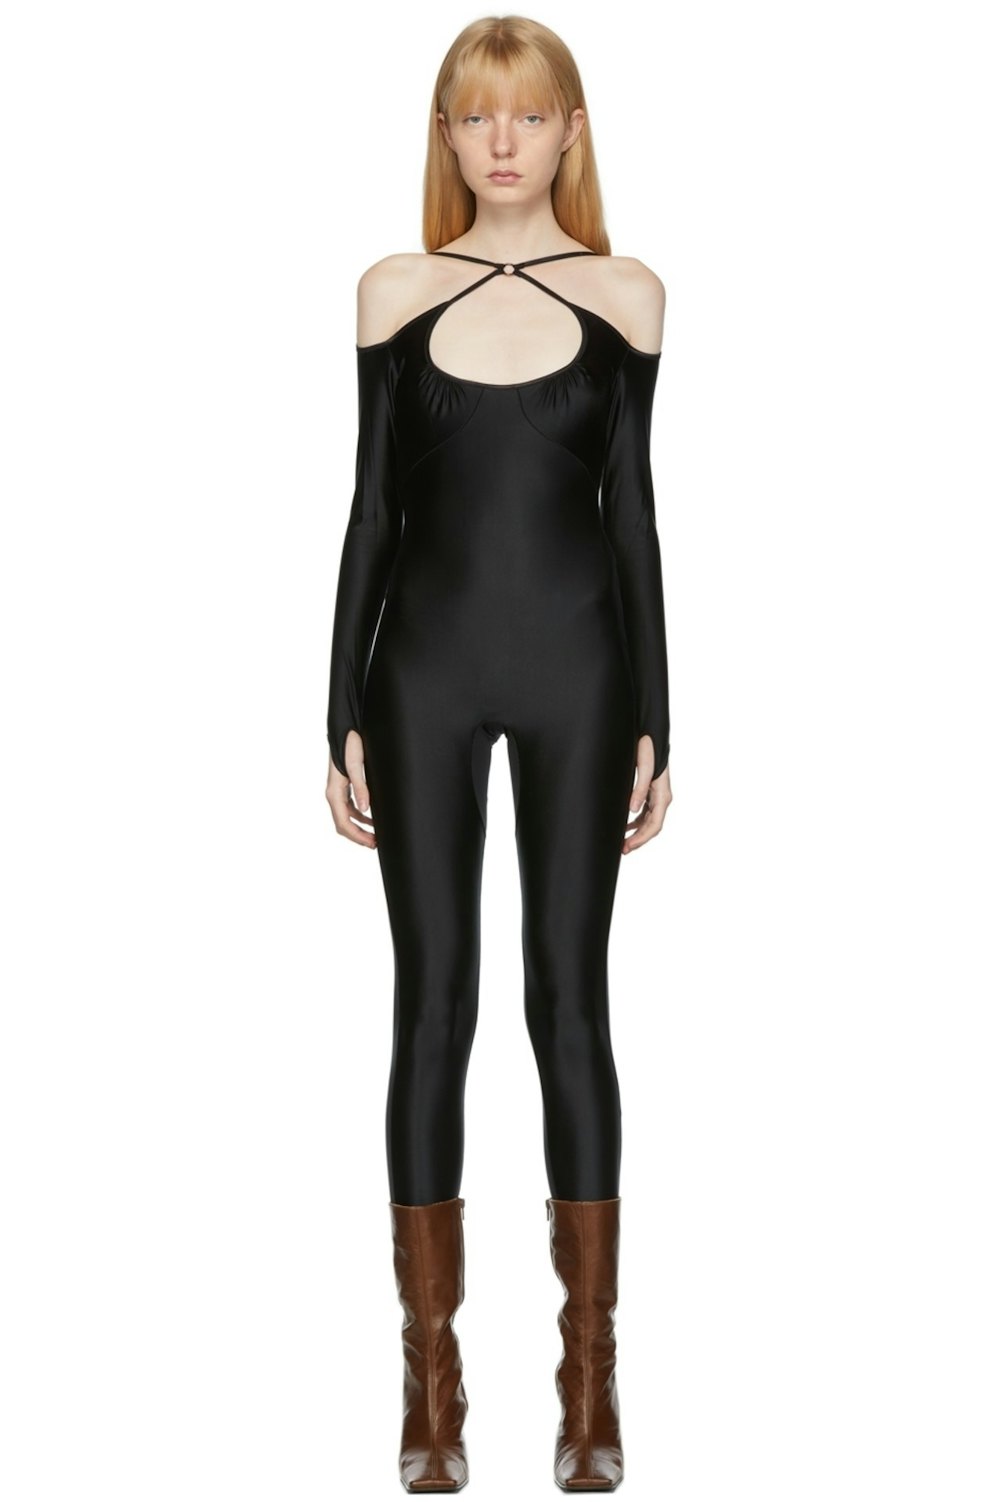 Black Nulle Alter Cross Neck Catsuit